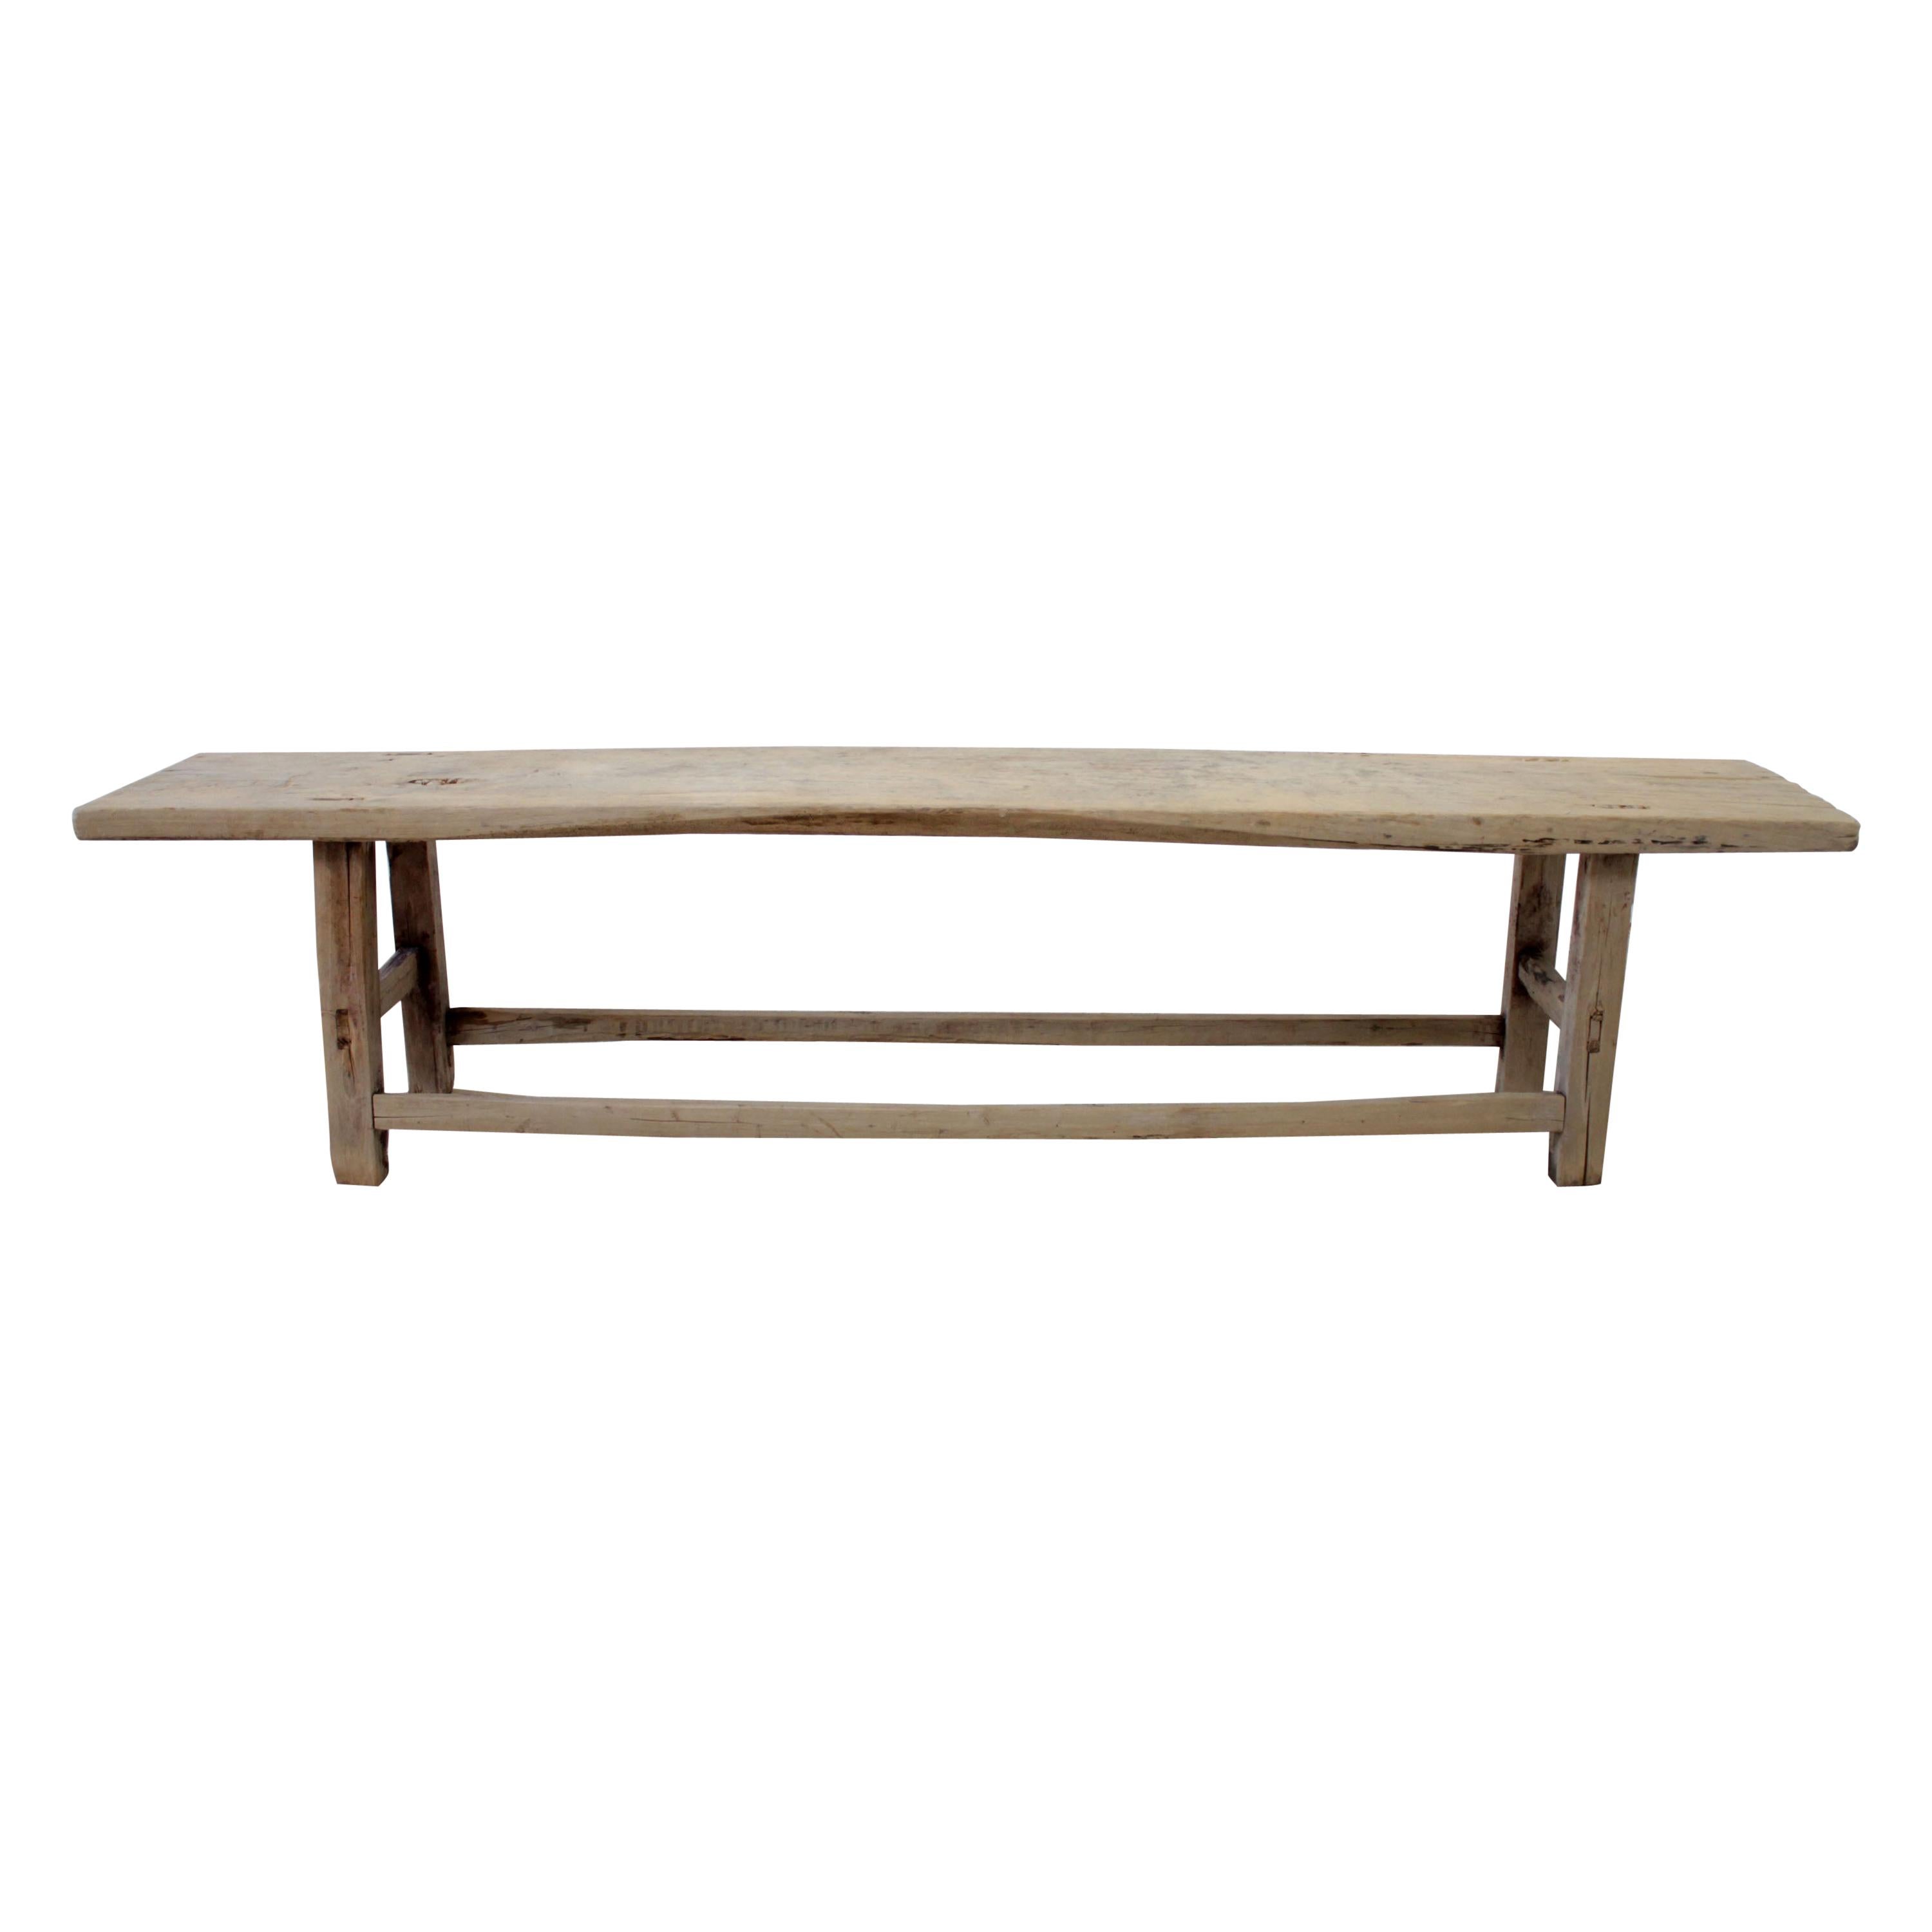 Antique Elm Wood Coffee Table Bench